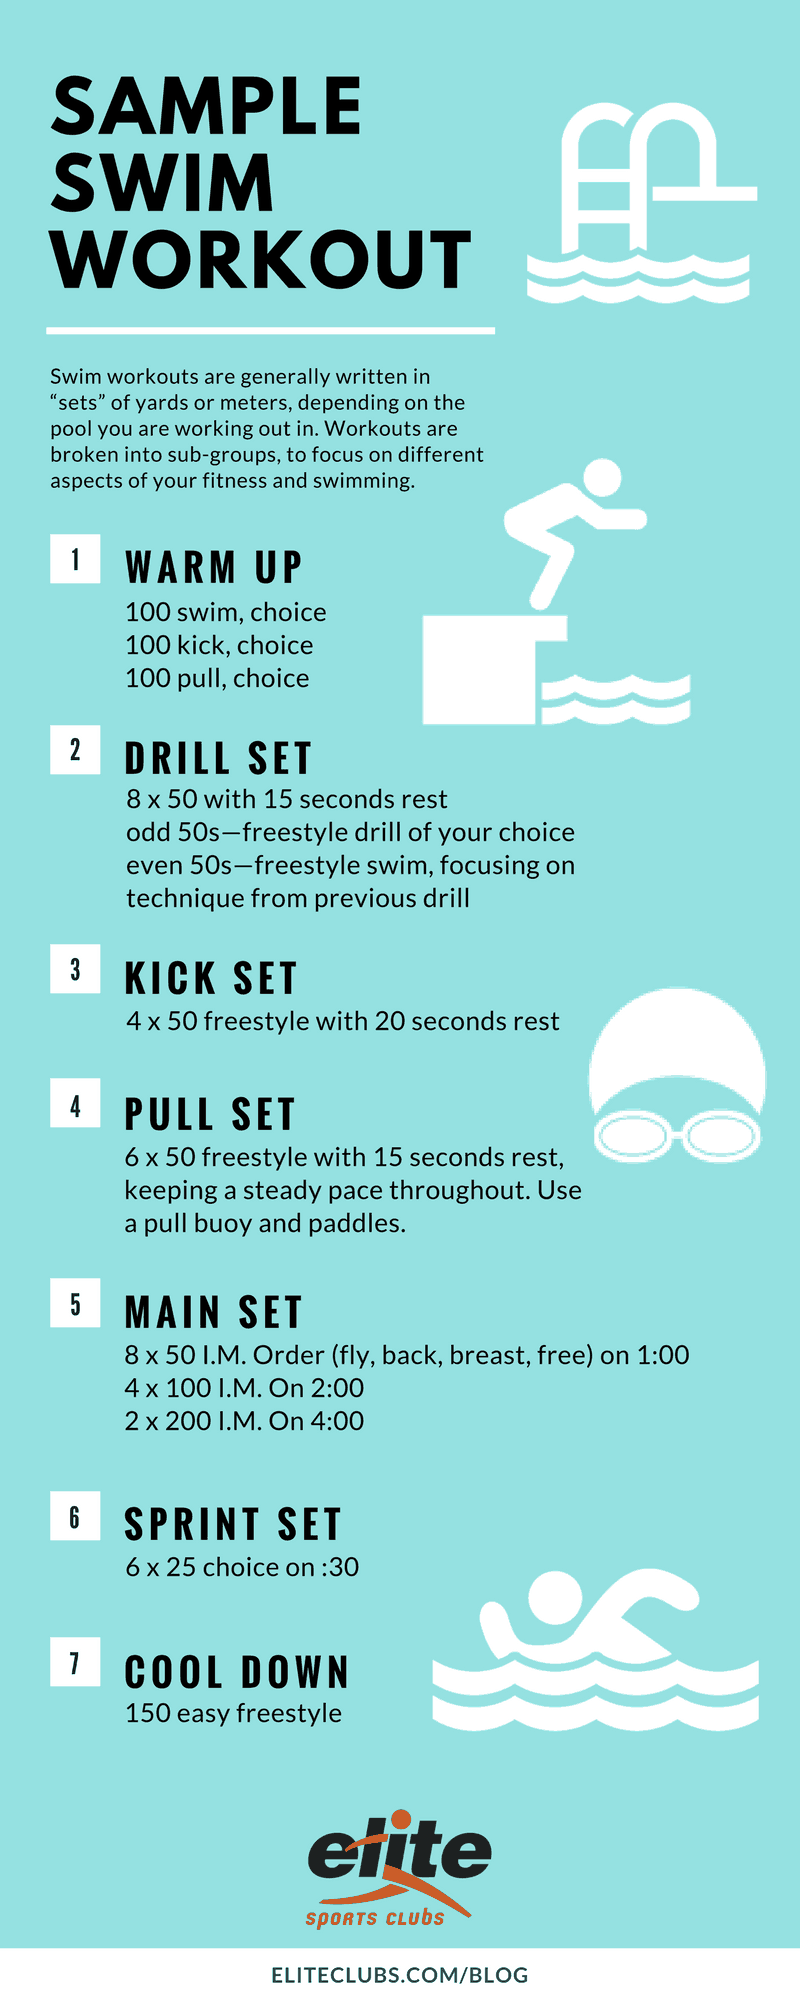 How to Read a Swim Workout - Elite Sports Clubs